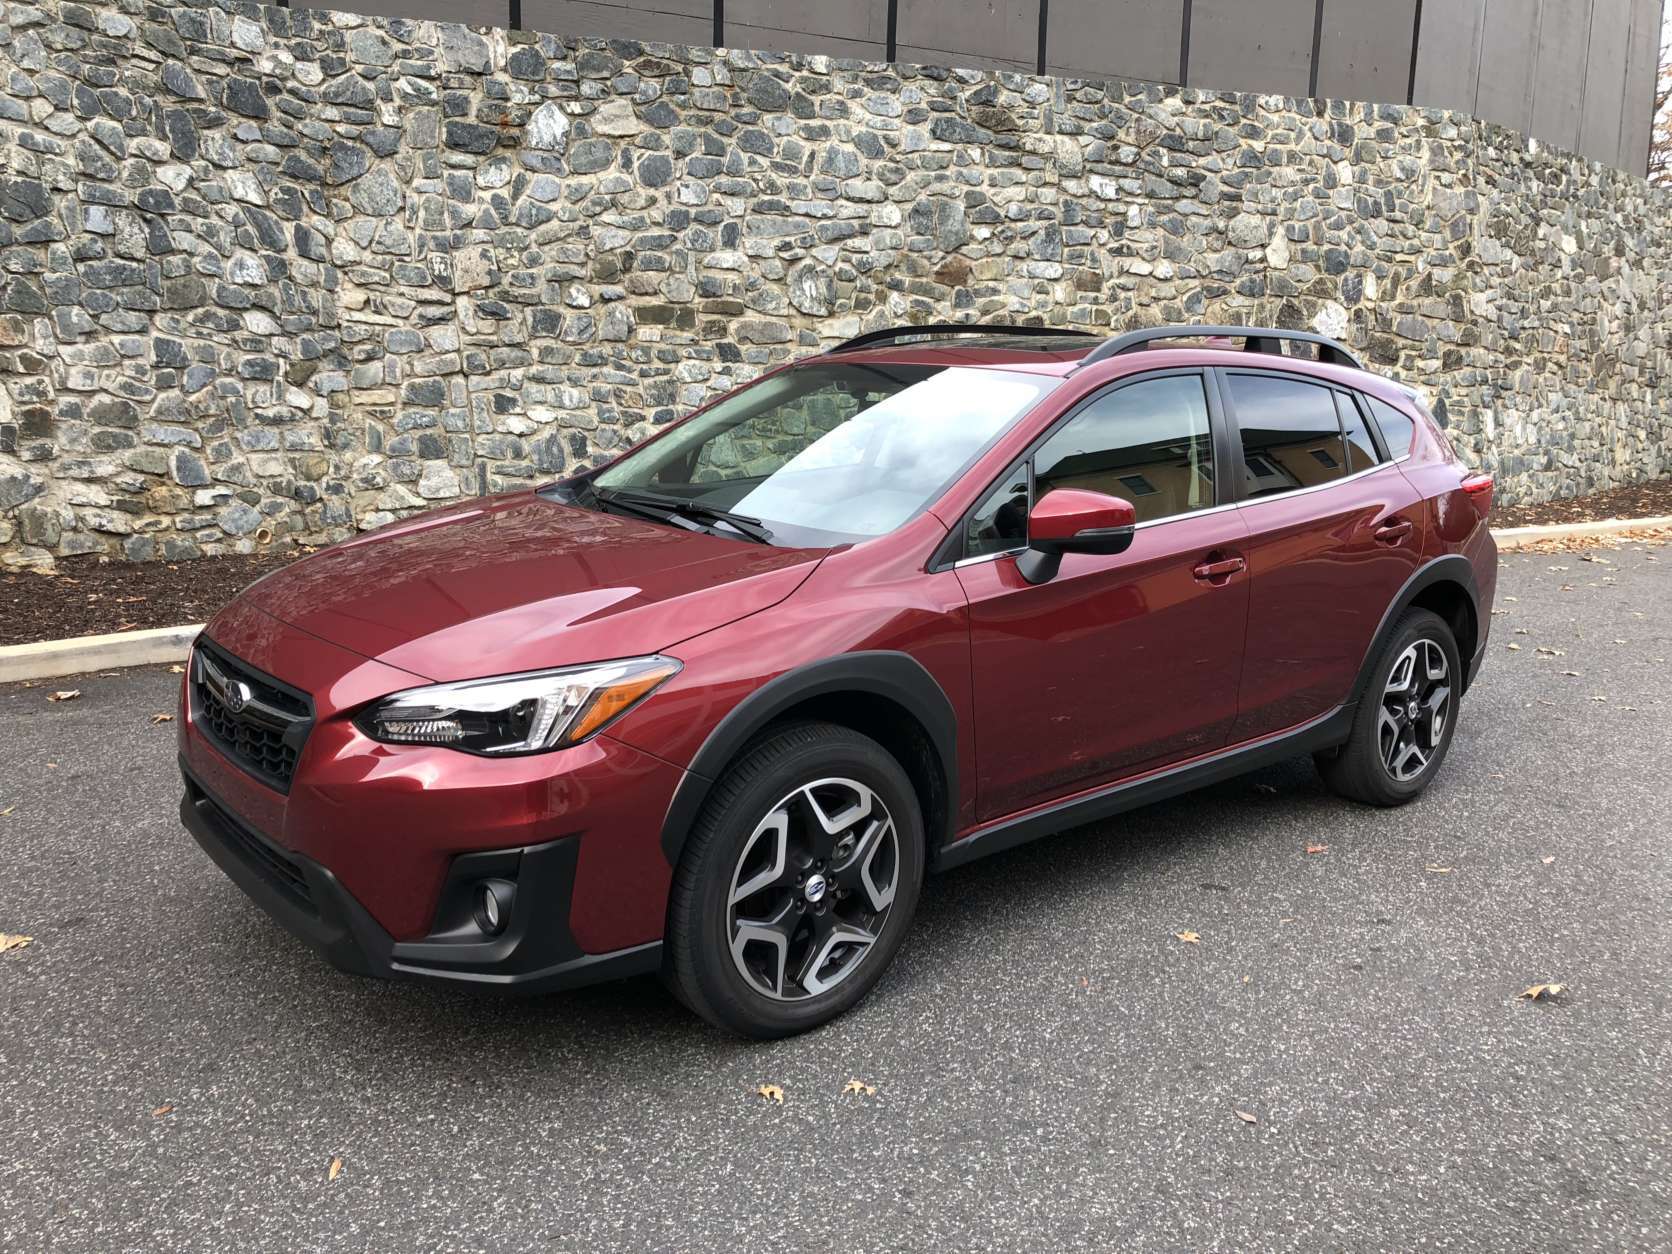 Parris tested the top-of-the-line Limited model with a $30,655 price tag. He said compared to the first generation Subaru, it feels like this time the car actually commands the price. (WTOP/Mike Parris)